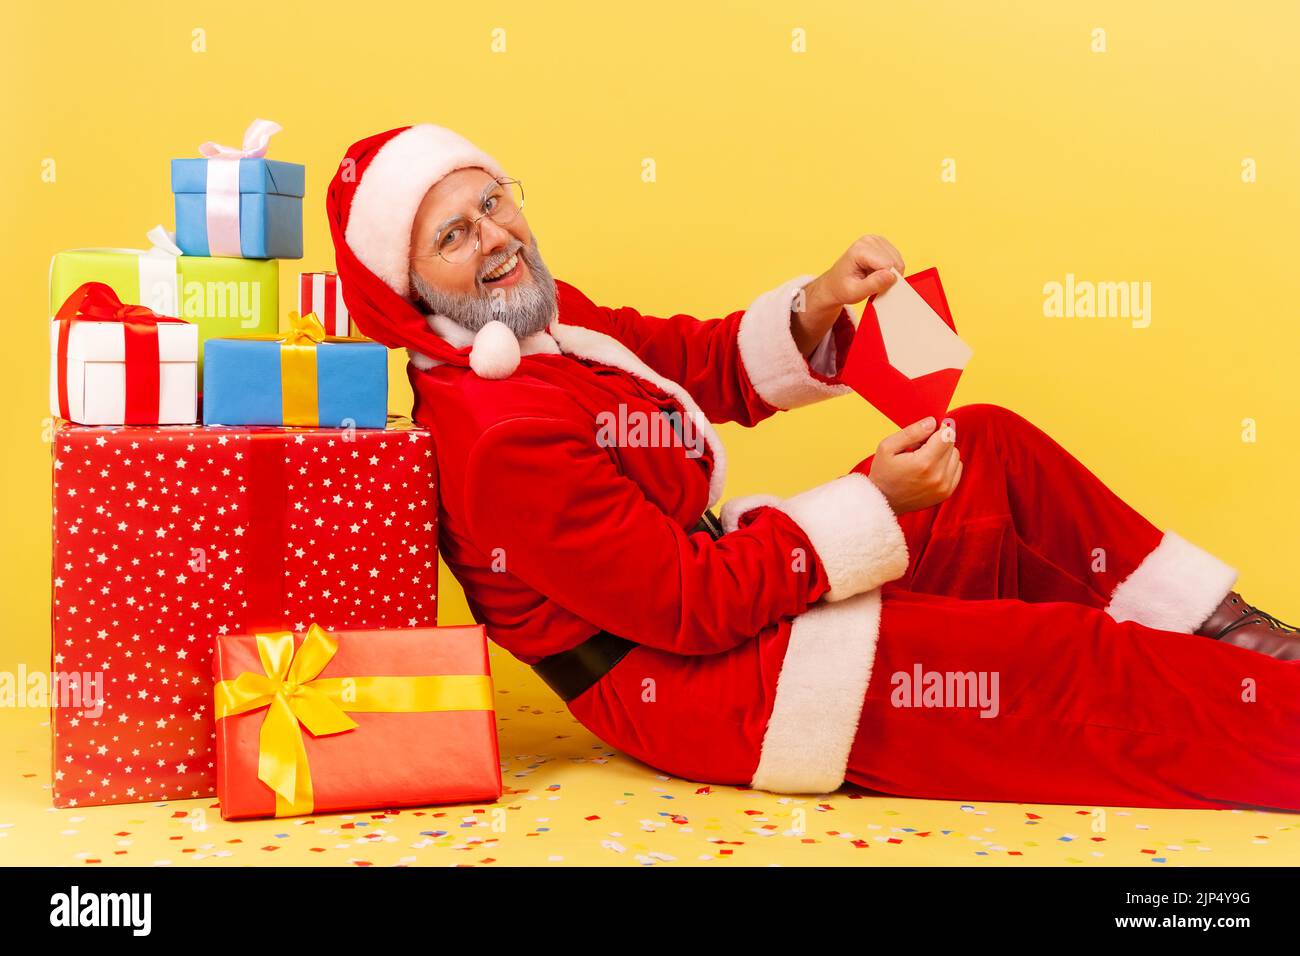 Profile portrait of elderly man with gray beard in santa claus costume sitting surrounded with Christmas boxes, holding envelope and smiling to camera. Indoor studio shot isolated on yellow background Stock Photo